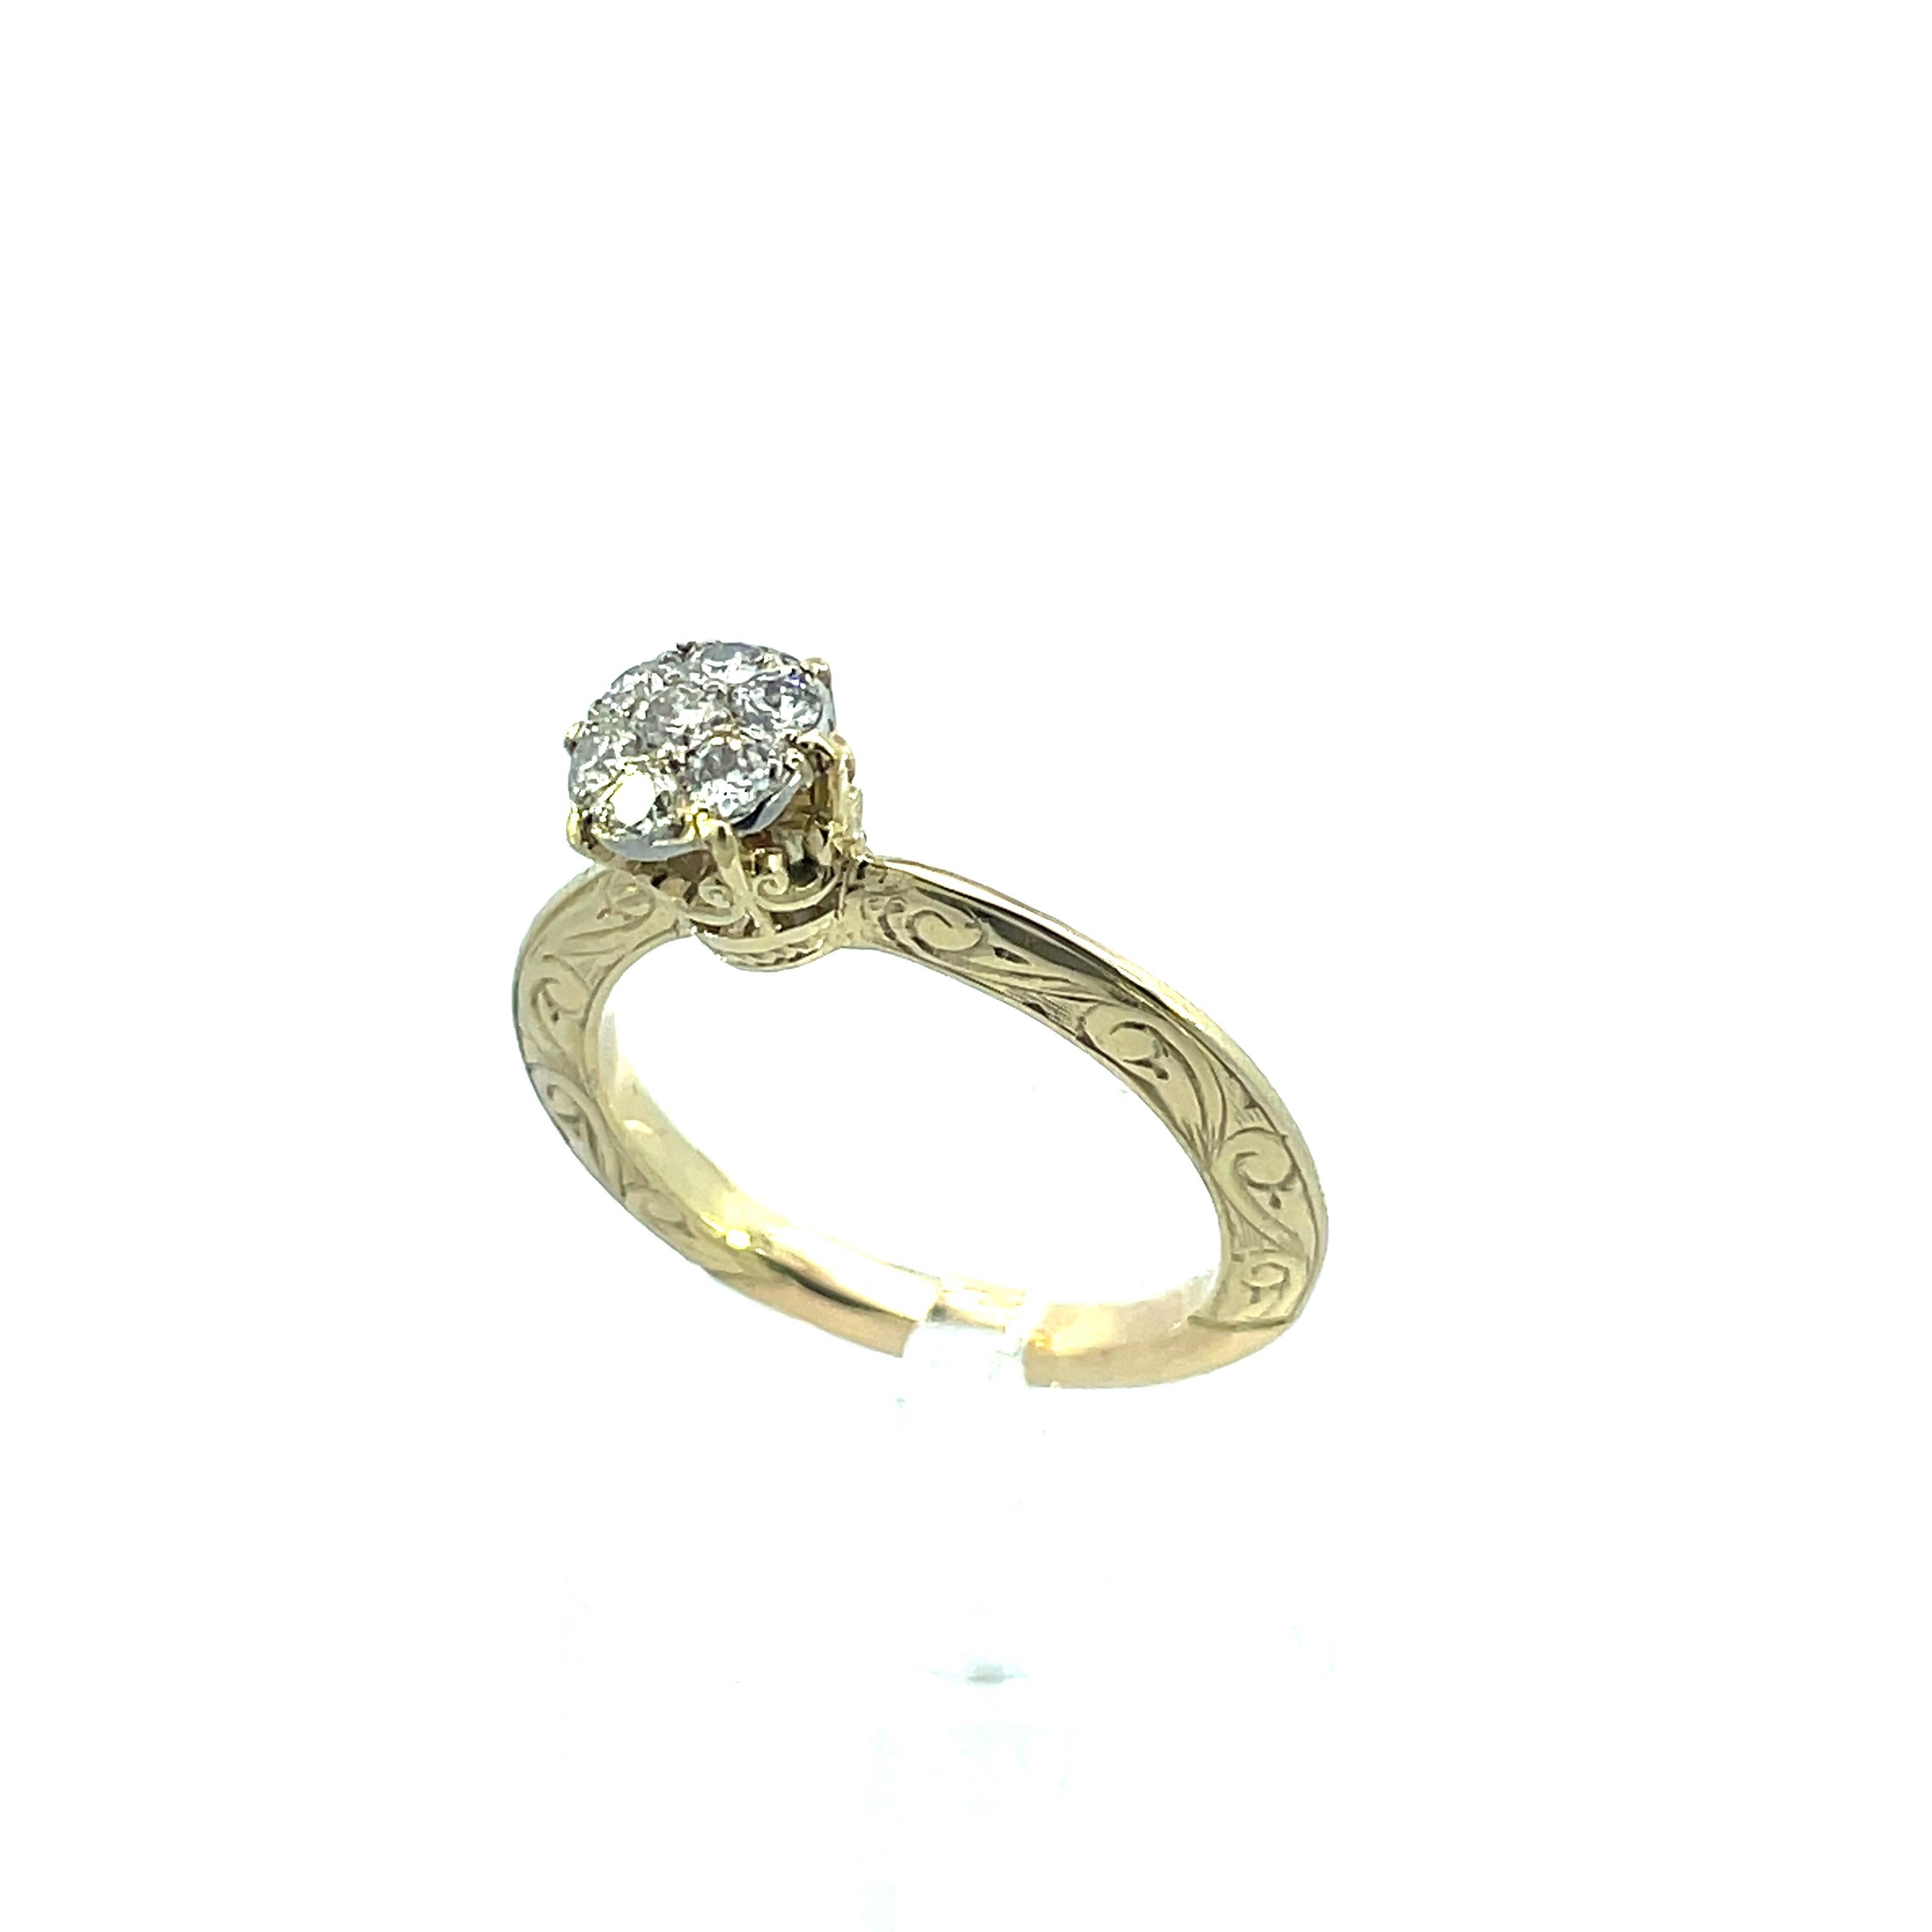 - 14K Yellow Gold 
- Platinum 
- .50 cttw G color Si1 clarity Diamond 
- Hand Engraved 
- Size 7.5 
- 4.74 Grams 
- 1890 

This is a gorgeous diamond ring from the Victorian period 1890, made in 14k yellow gold and a platinum head, with hand